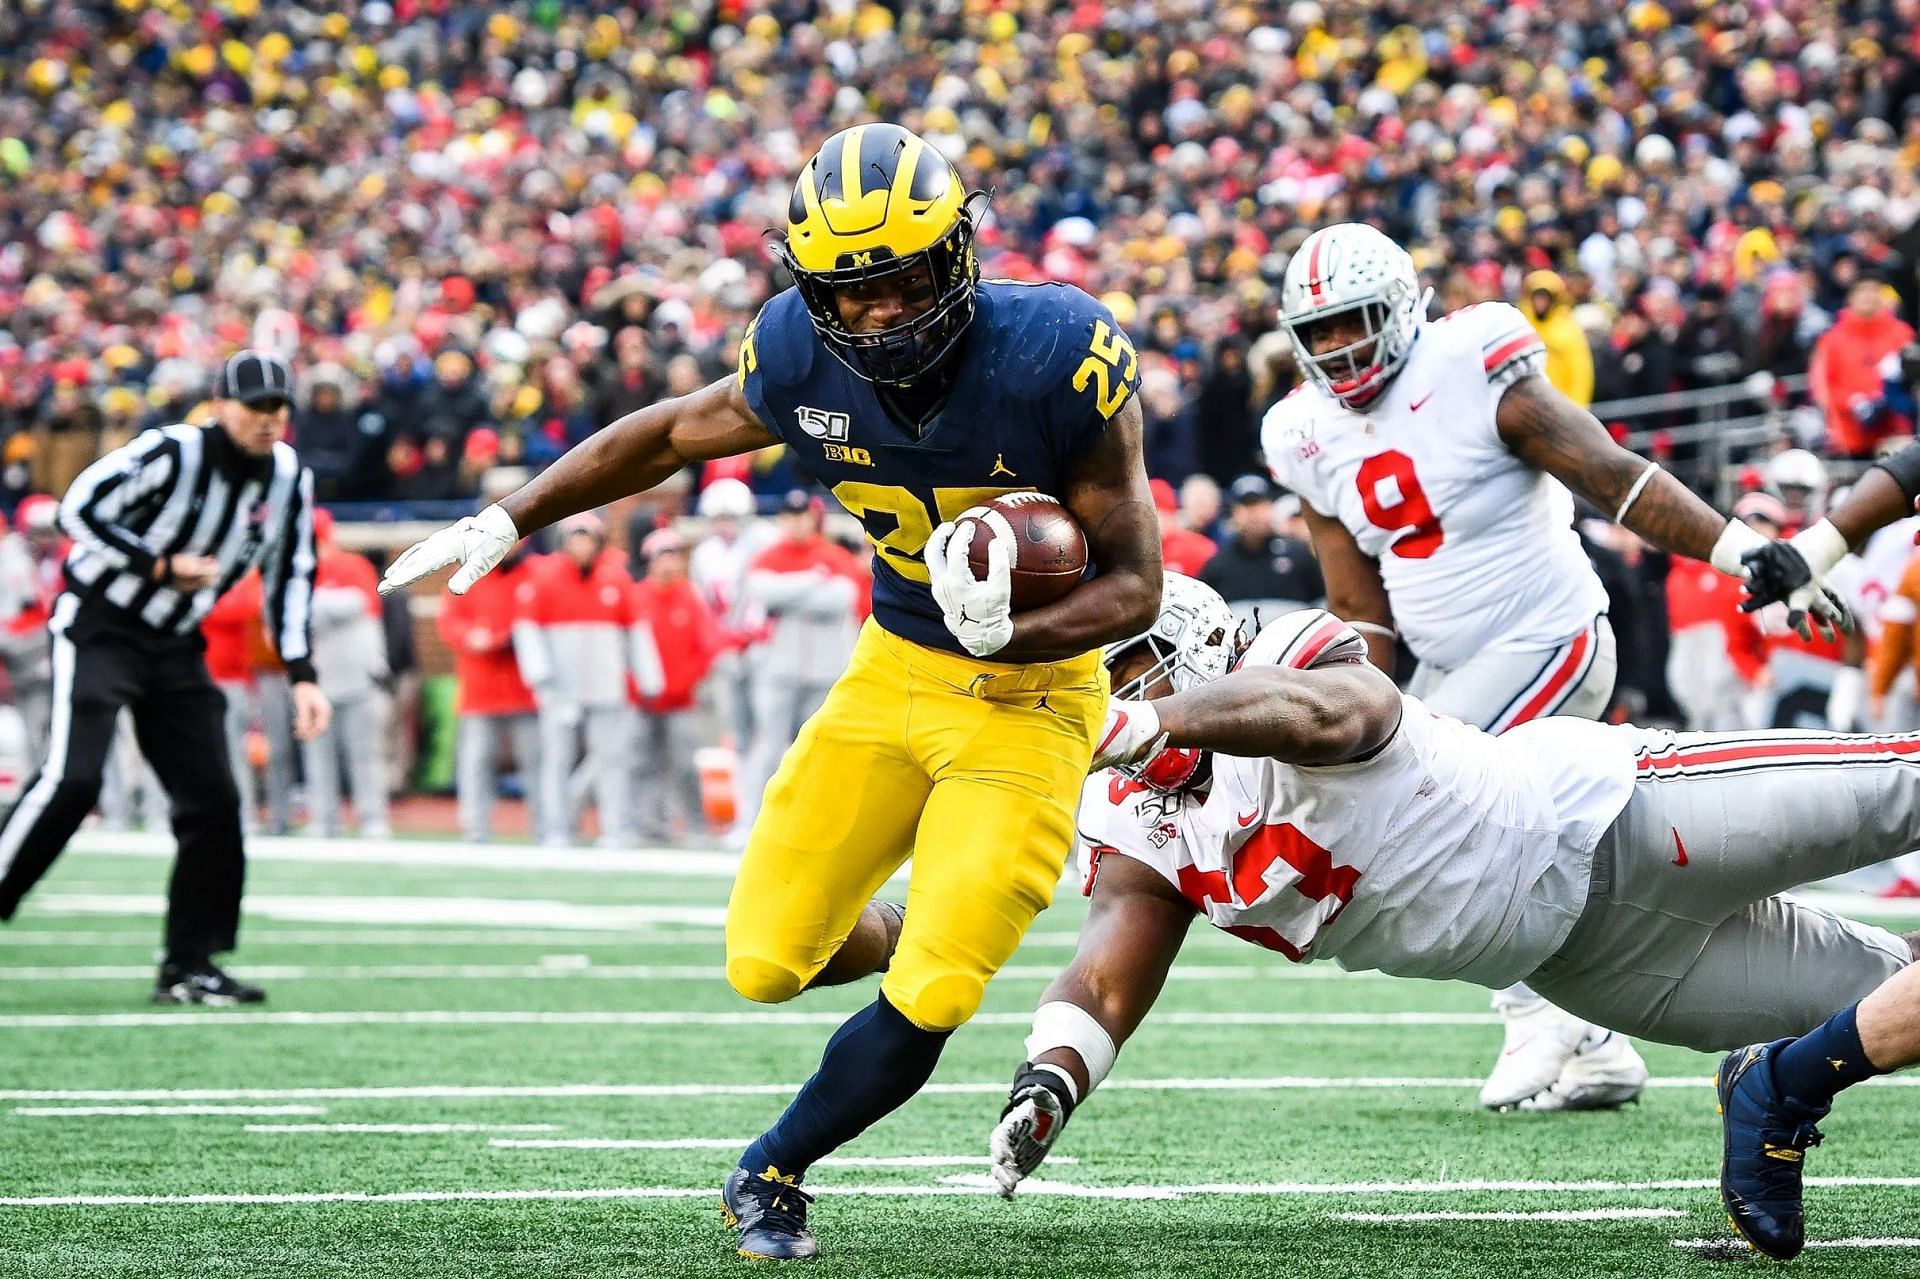 Hassan Haskins in action for the Michigan Wolverines